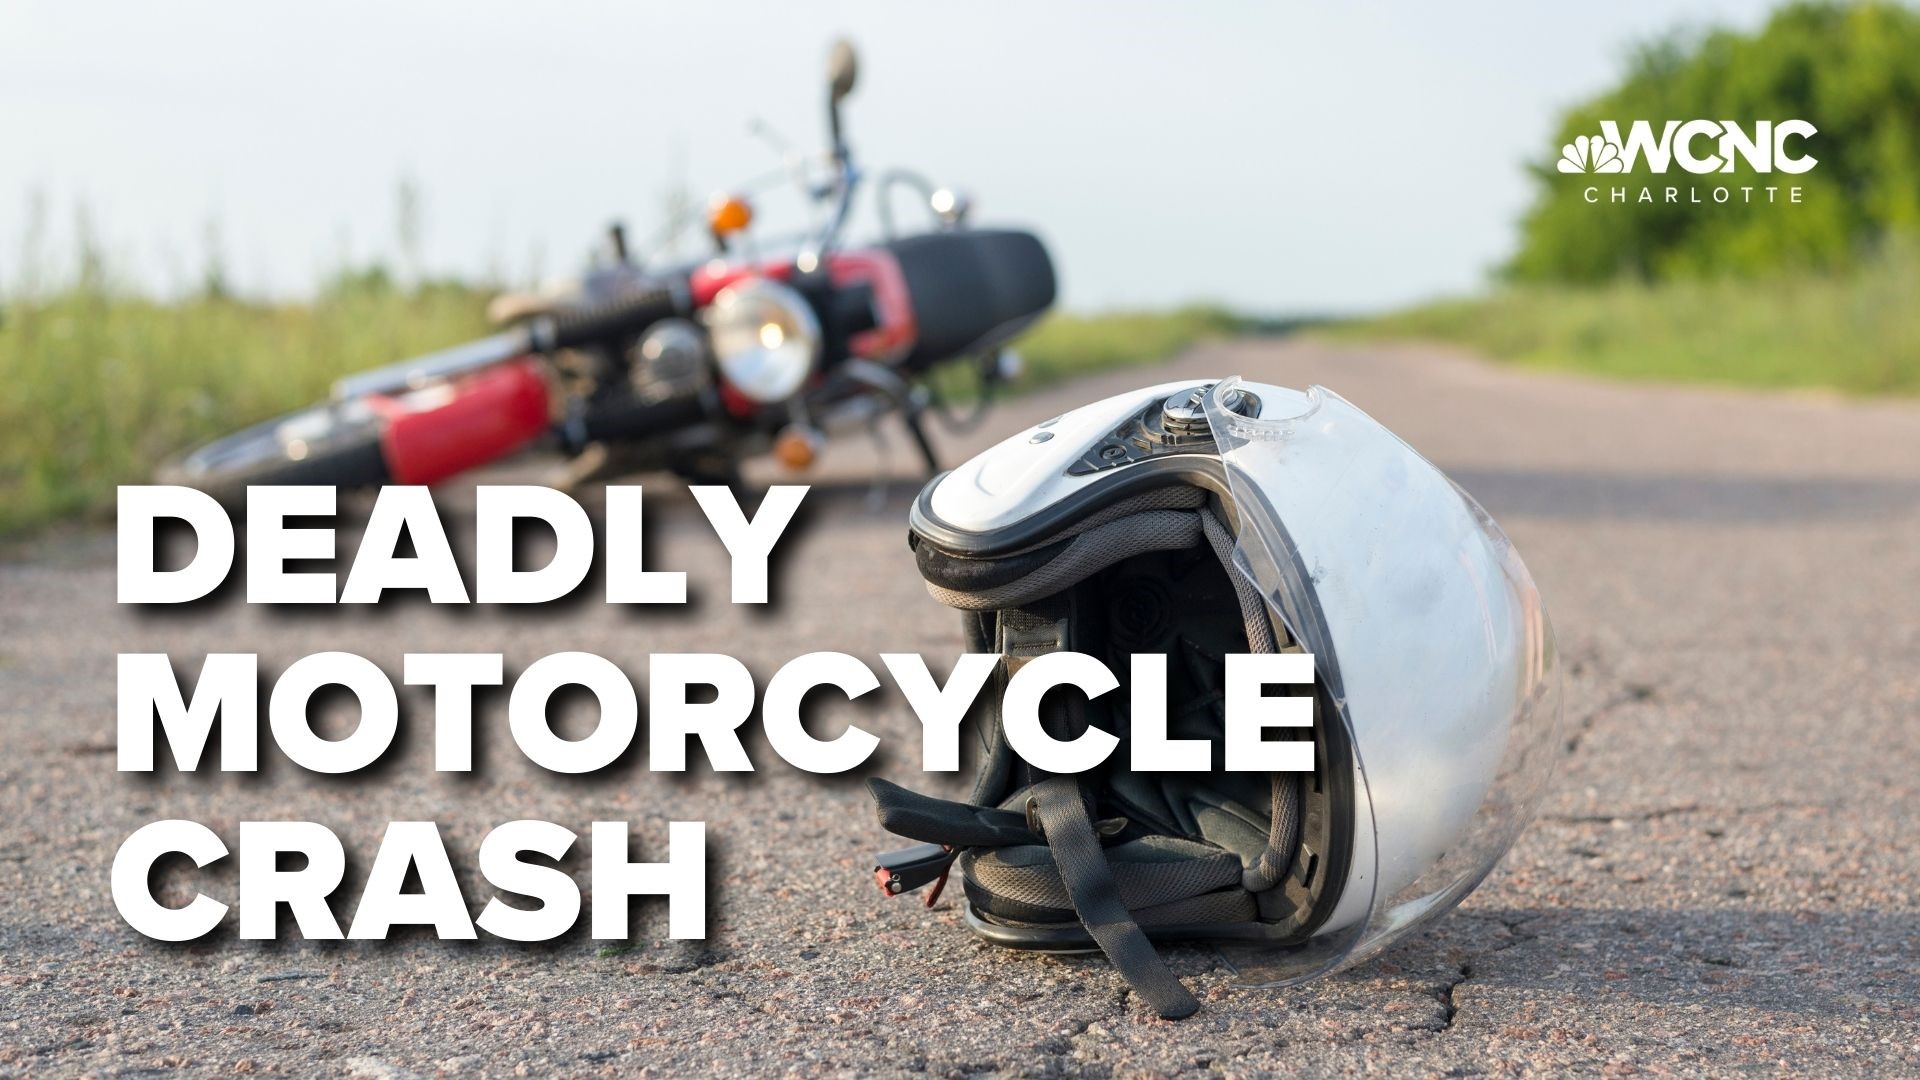 One person is dead following a deadly motorcycle crash